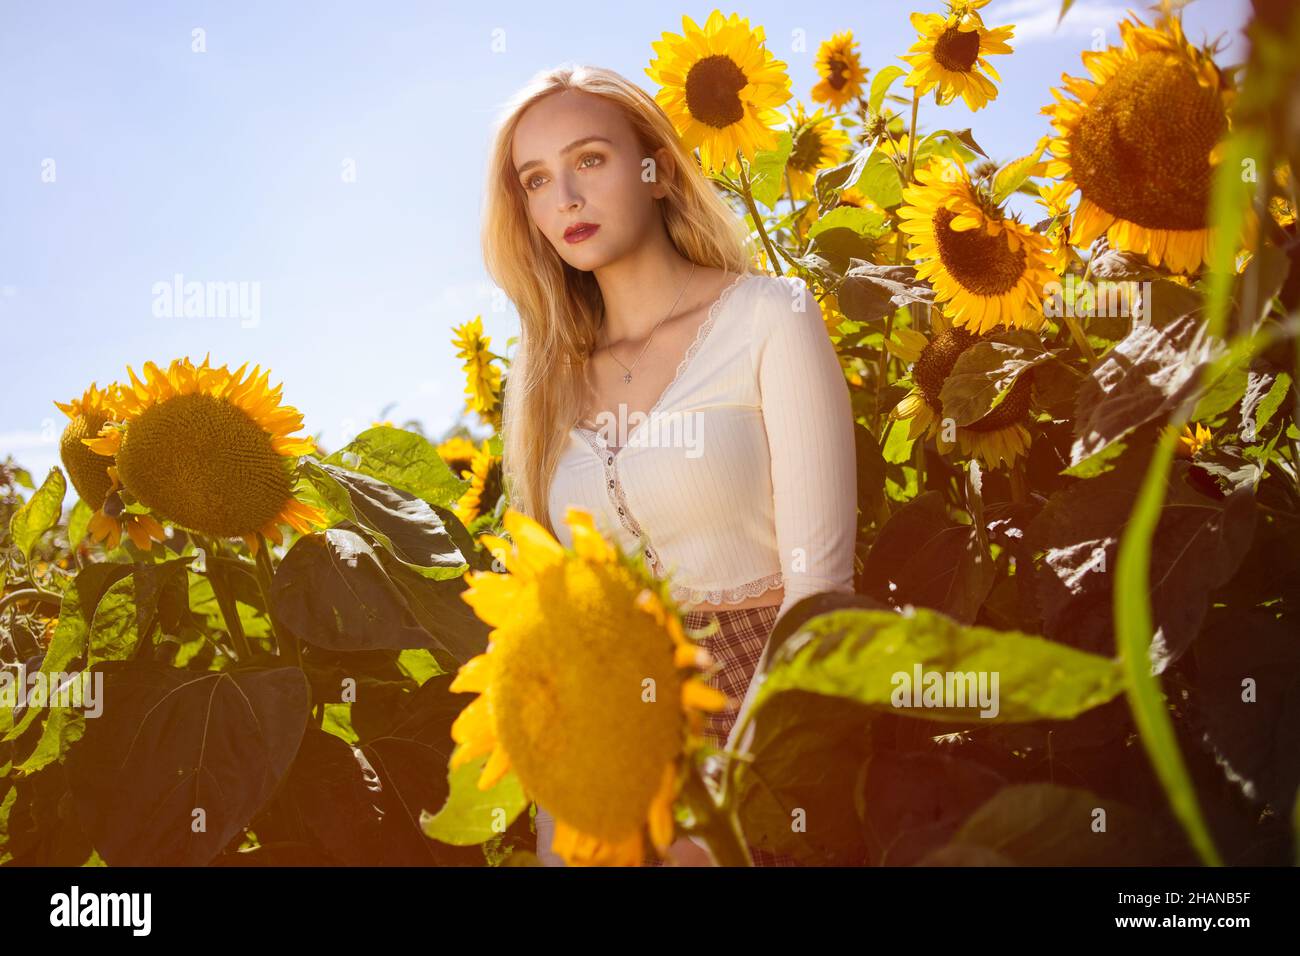 Beautiful Young women ( age 22) with long blonde hair poses in a sunflower field on a hot sunny day Stock Photo